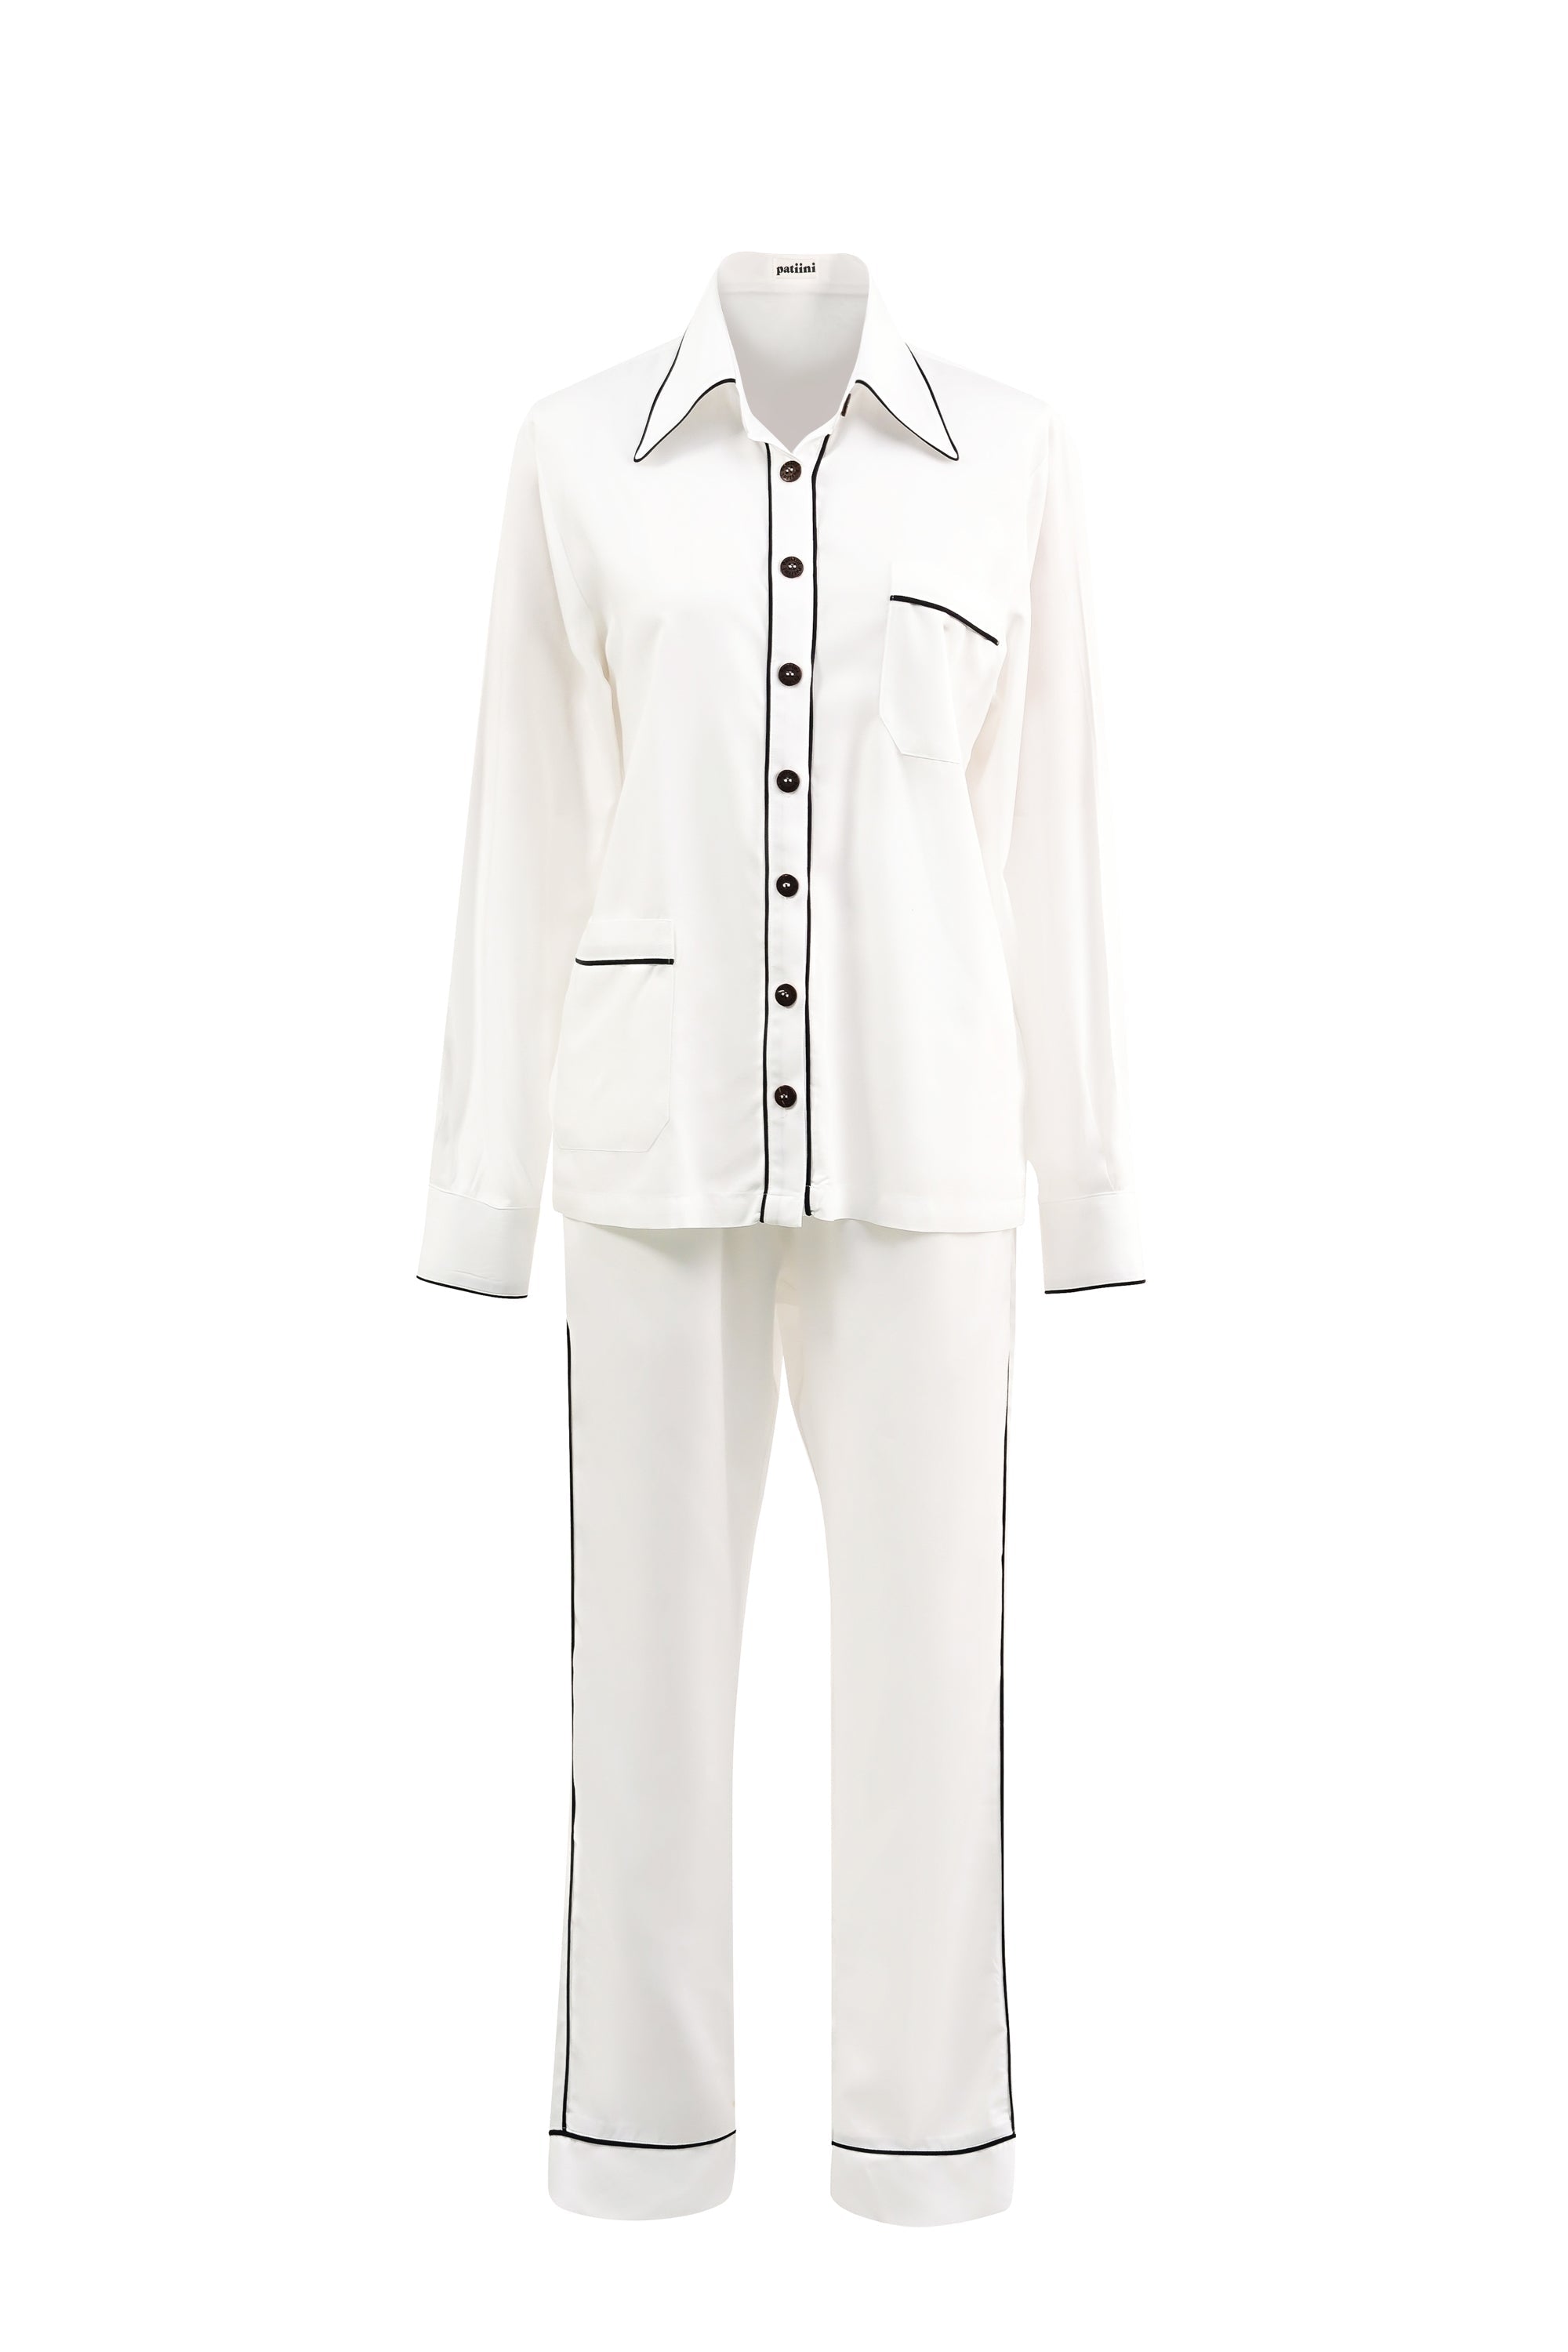 White long-sleeve pajama set with contrasting black piping.